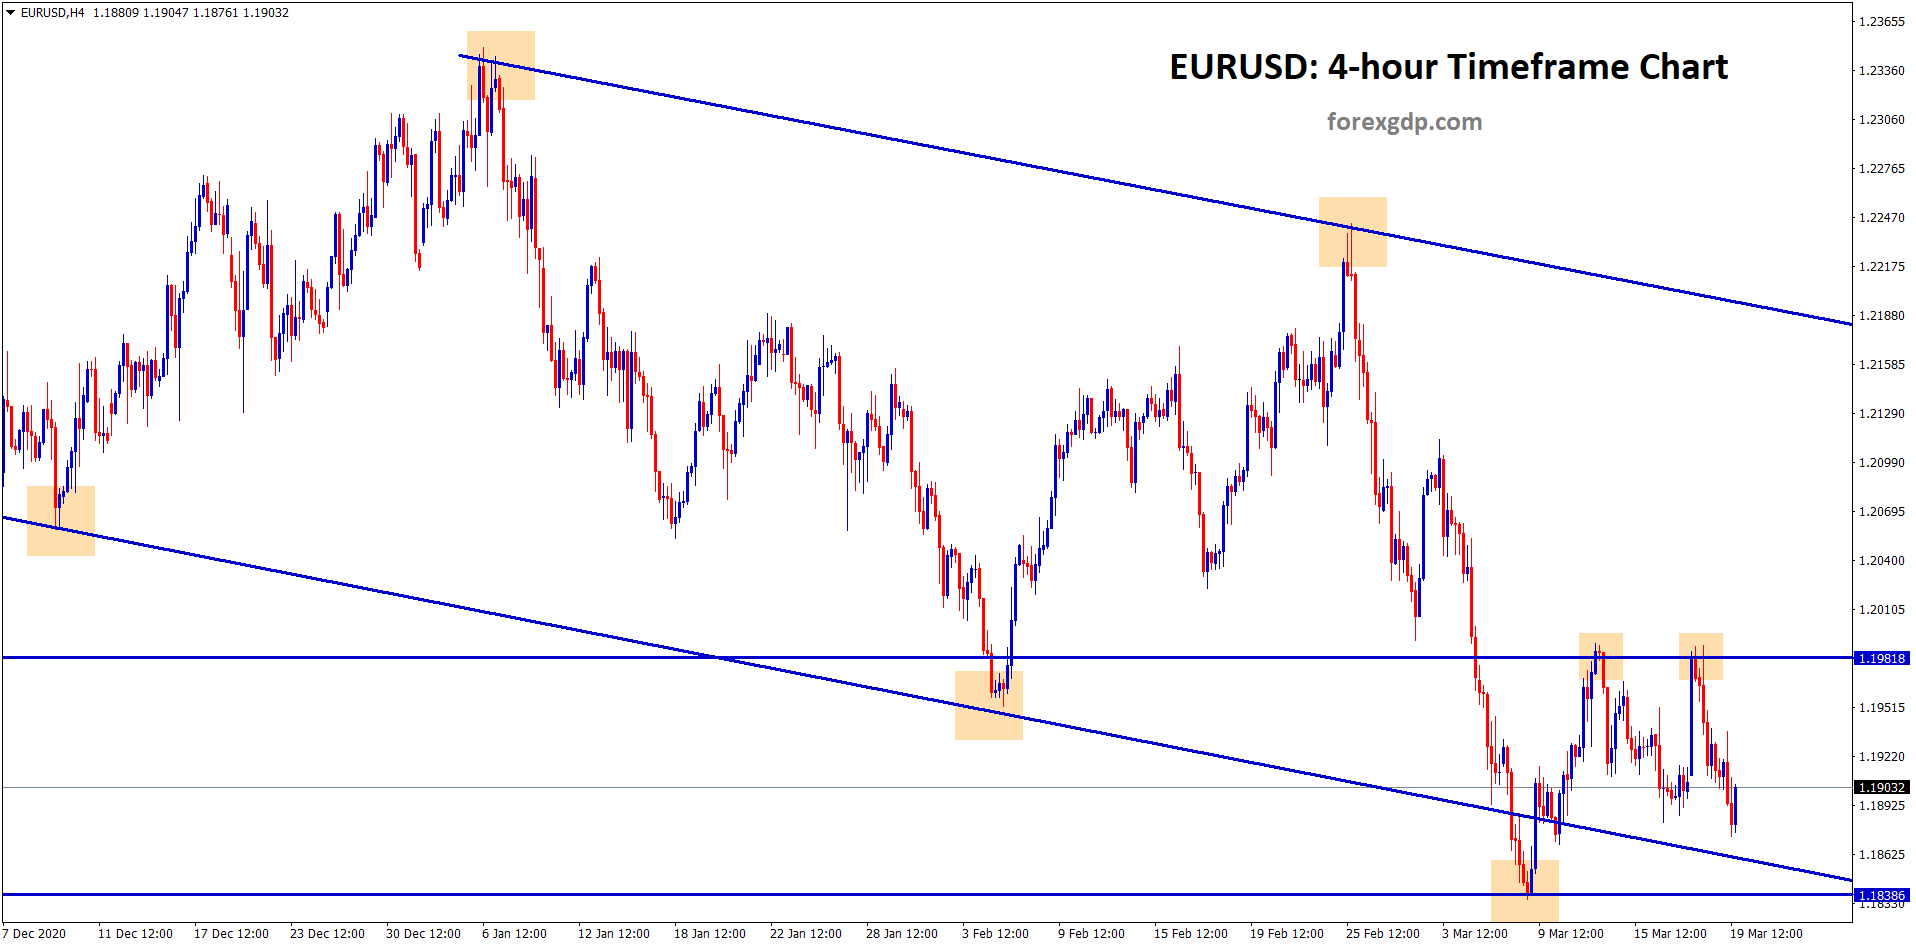 eurusd ranging at the lower low level